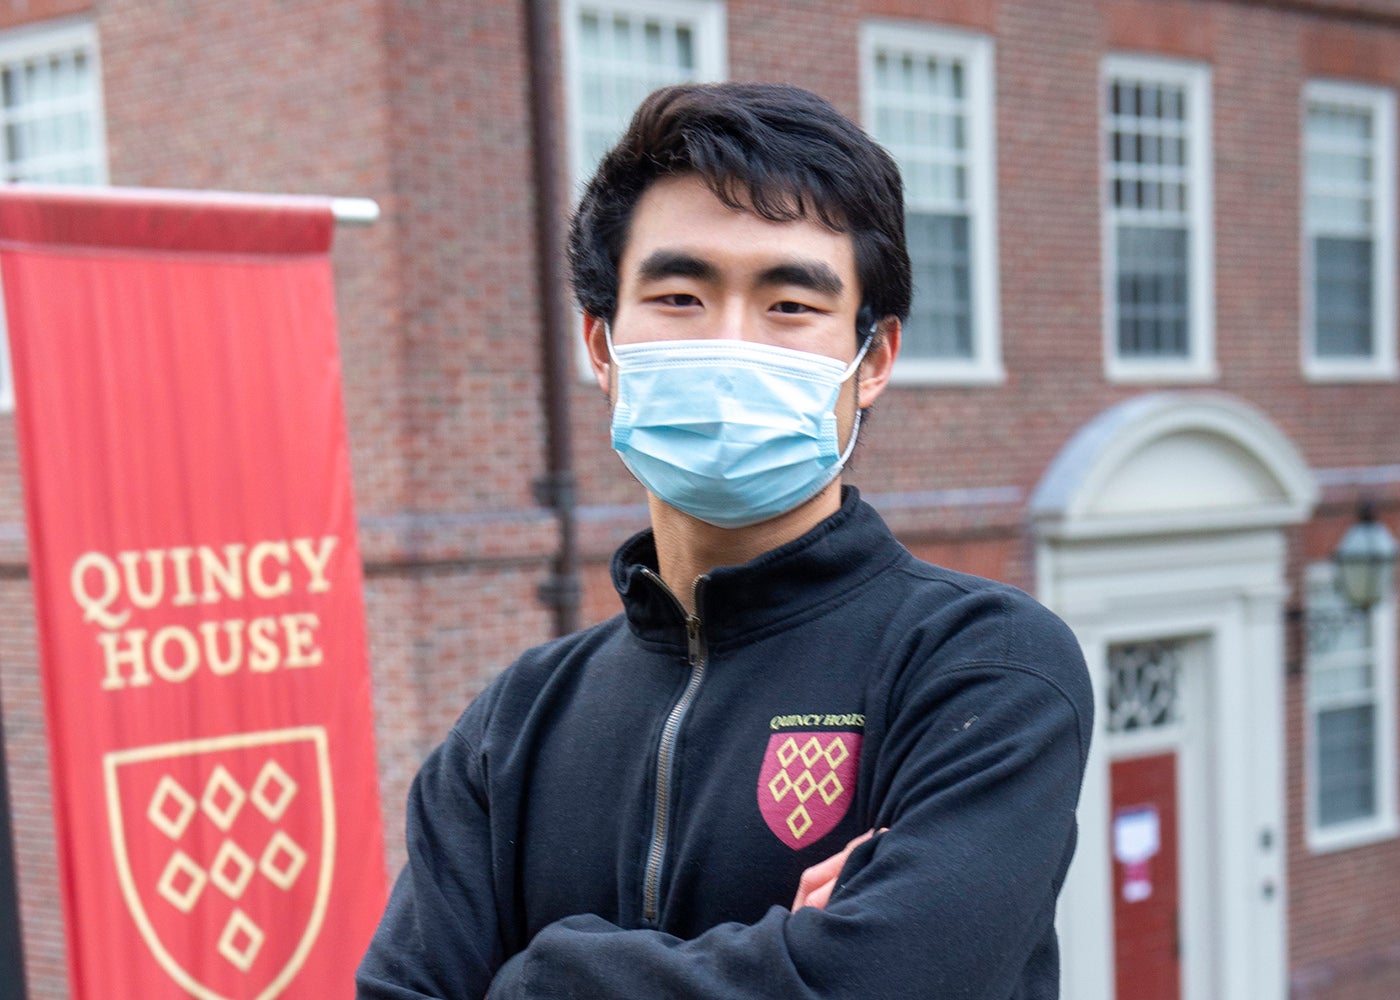 A student wearing a mask poses in front of a red Quincy House banner on campus